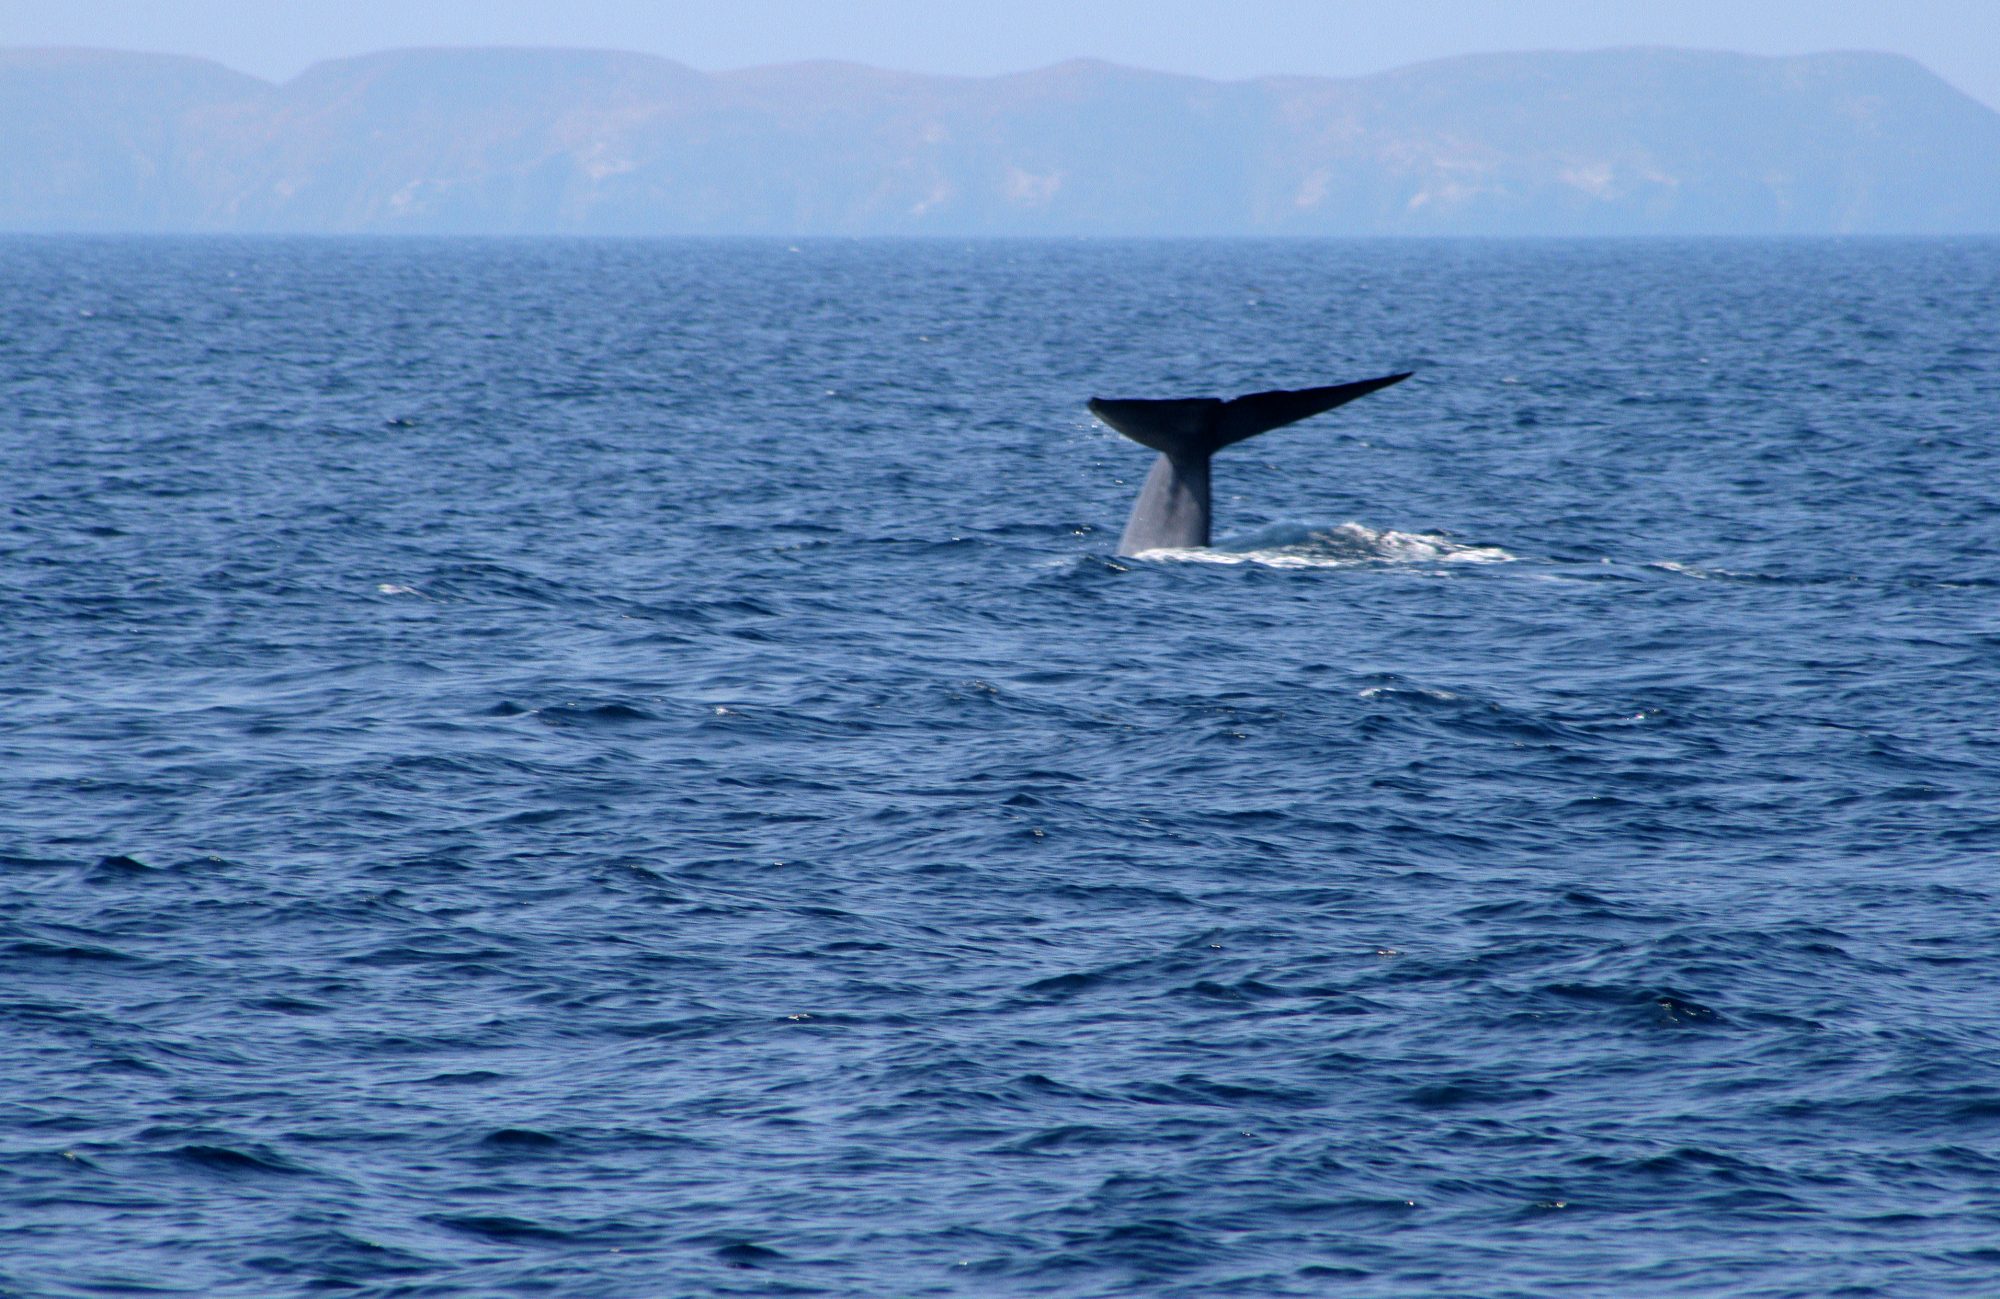 Channel Islands Whale Watching (3) - Doug's Channel Islands Tours